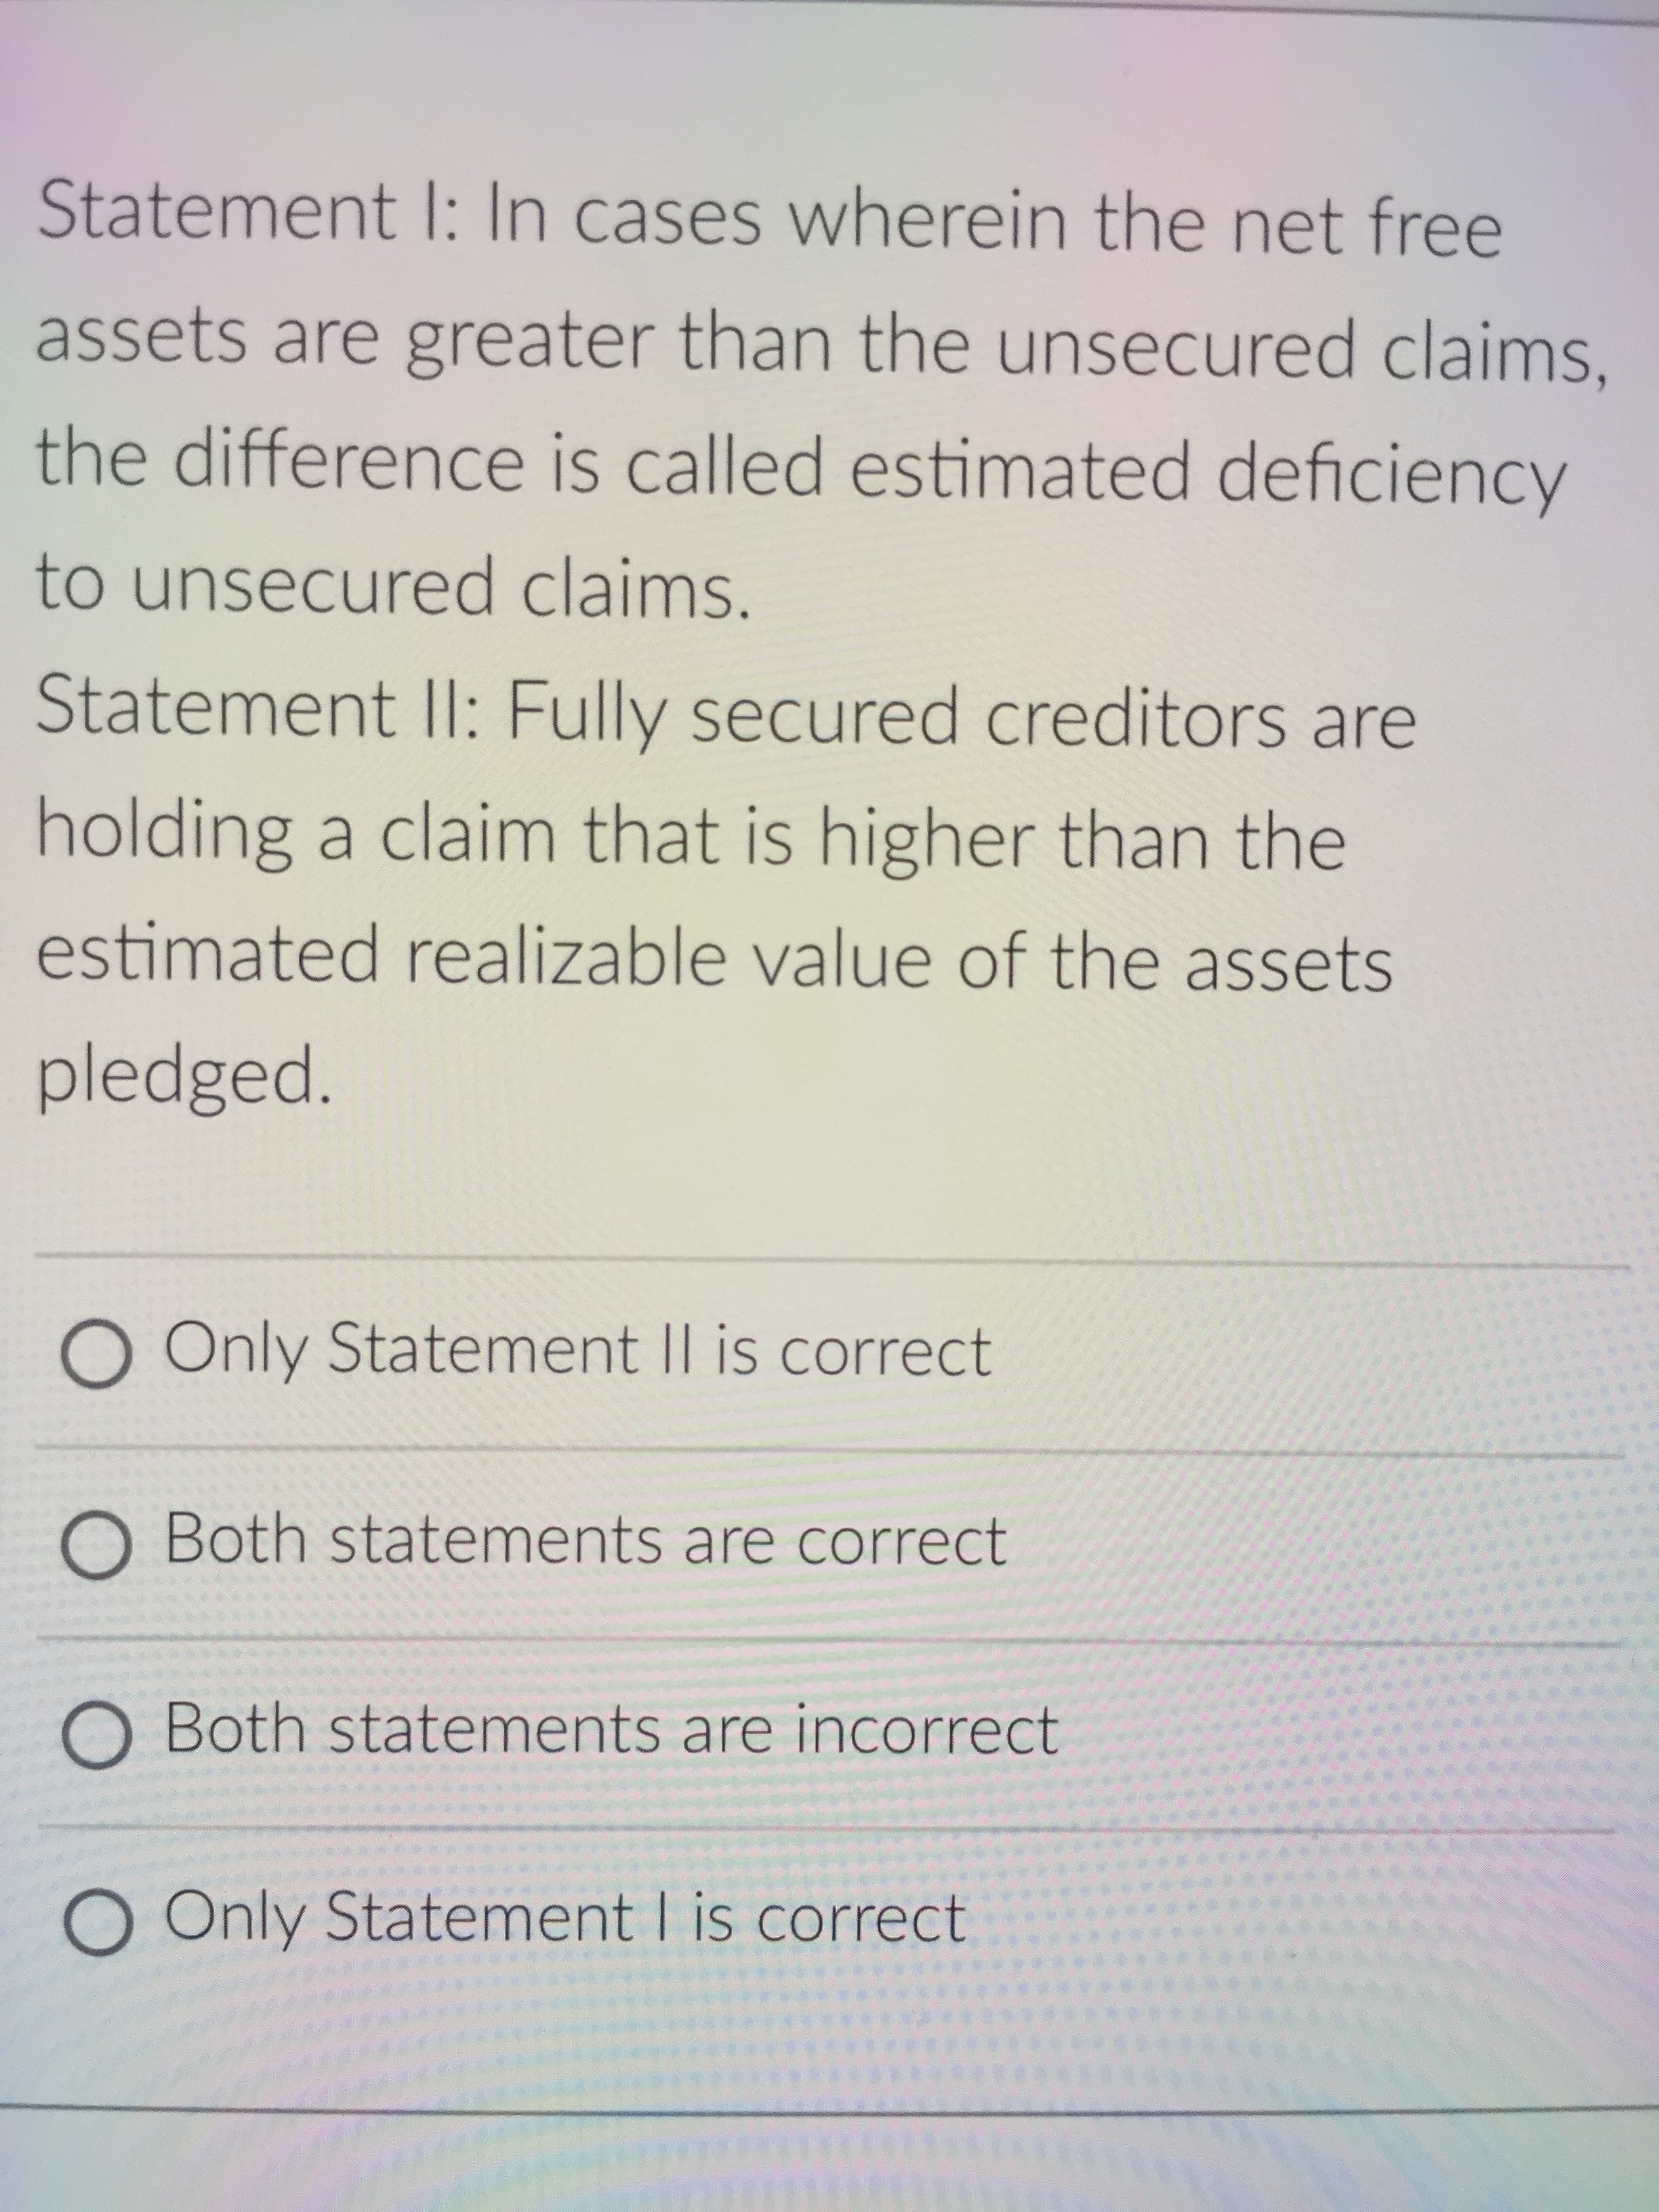 Statement I: In cases wherein the net free
assets are greater than the unsecured claims,
the difference is called estimated deficiency
to unsecured claims.
Statement II: Fully secured creditors are
holding a claim that is higher than the
estimated realizable value of the assets
pledged.
O Only Statement II is correct
O Both statements are correct
O Both statements are incorrect
O Only Statement I is correct
